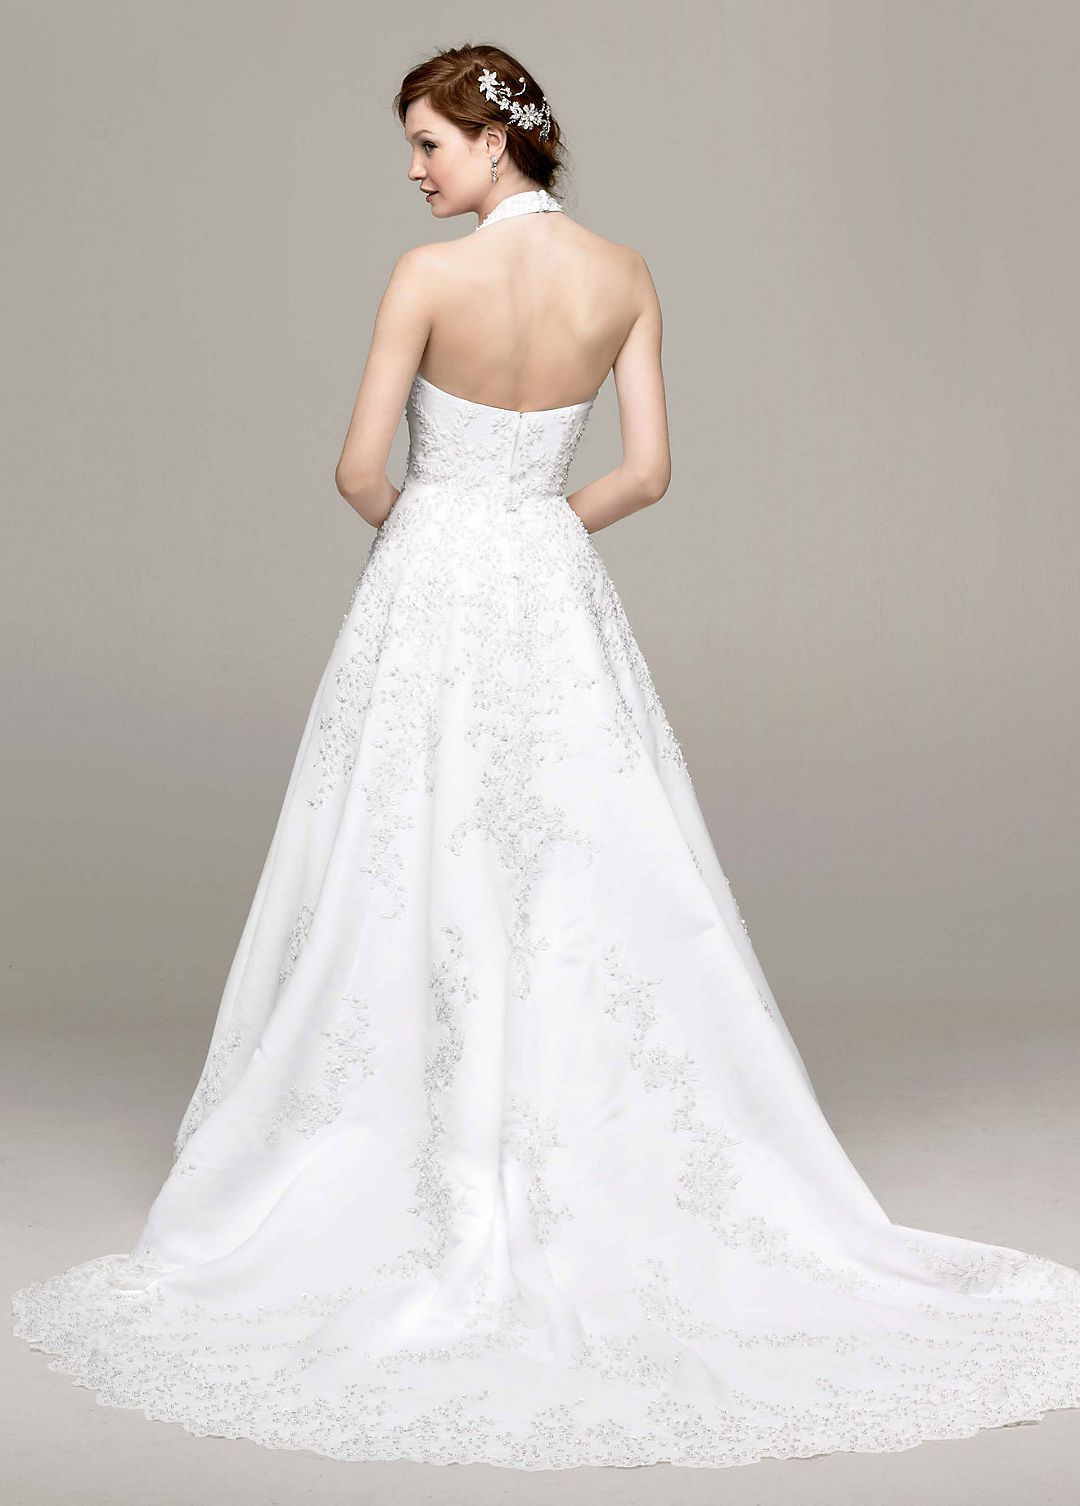 Satin Halter A-line Wedding Dress with Beaded Lace Image 3